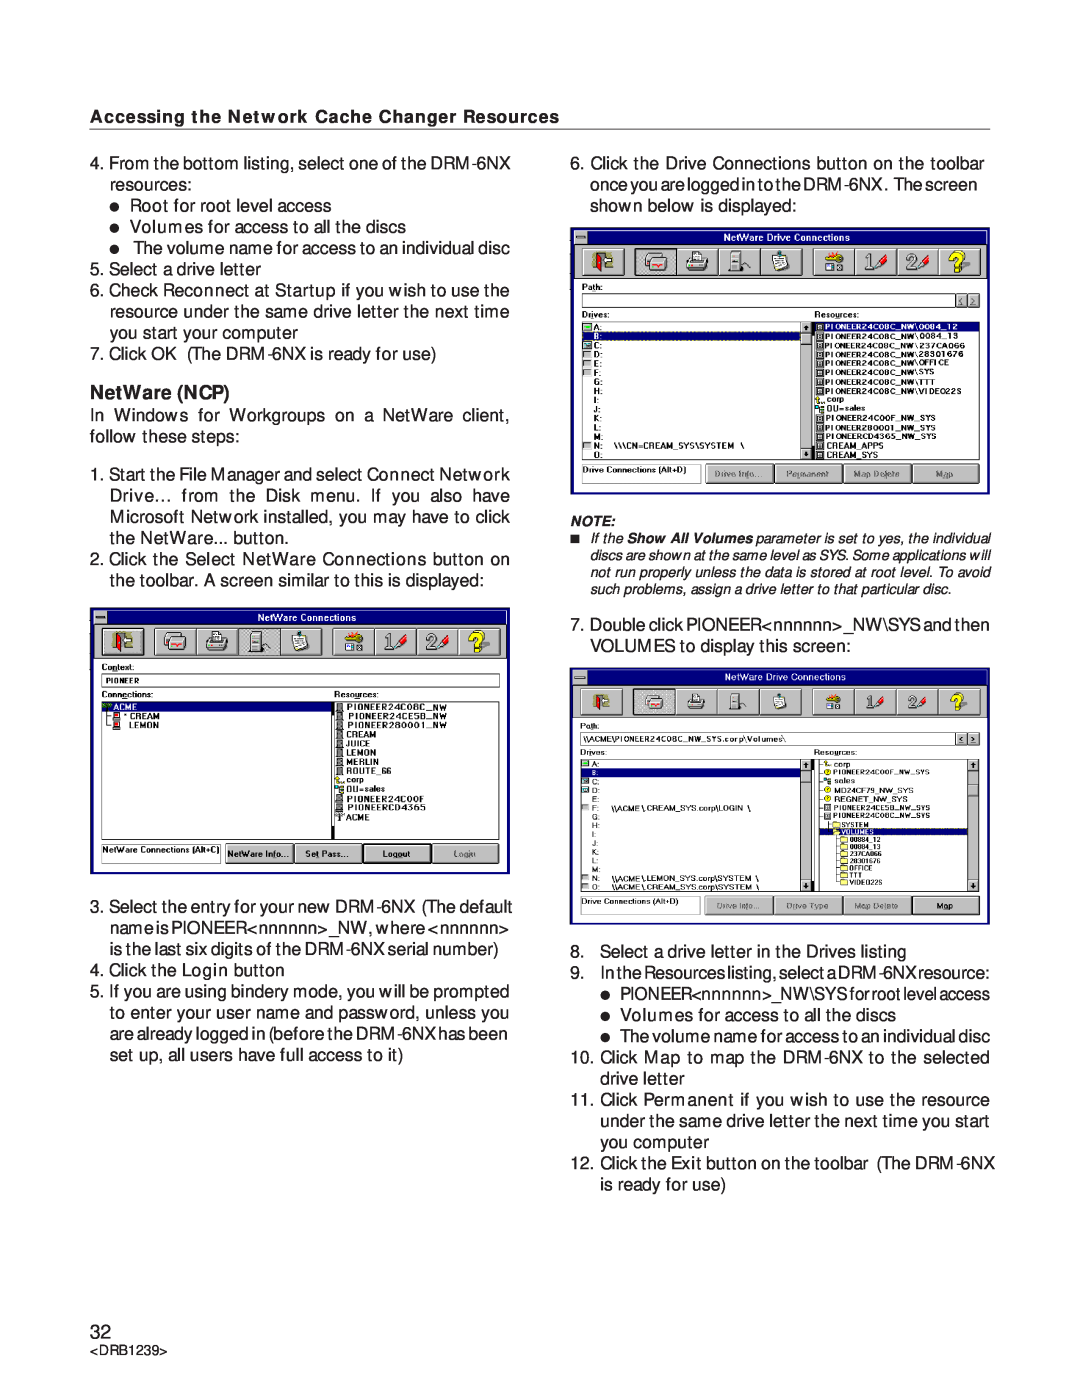 Pioneer DRM-6NX manual NetWare NCP, Accessing the Network Cache Changer Resources 